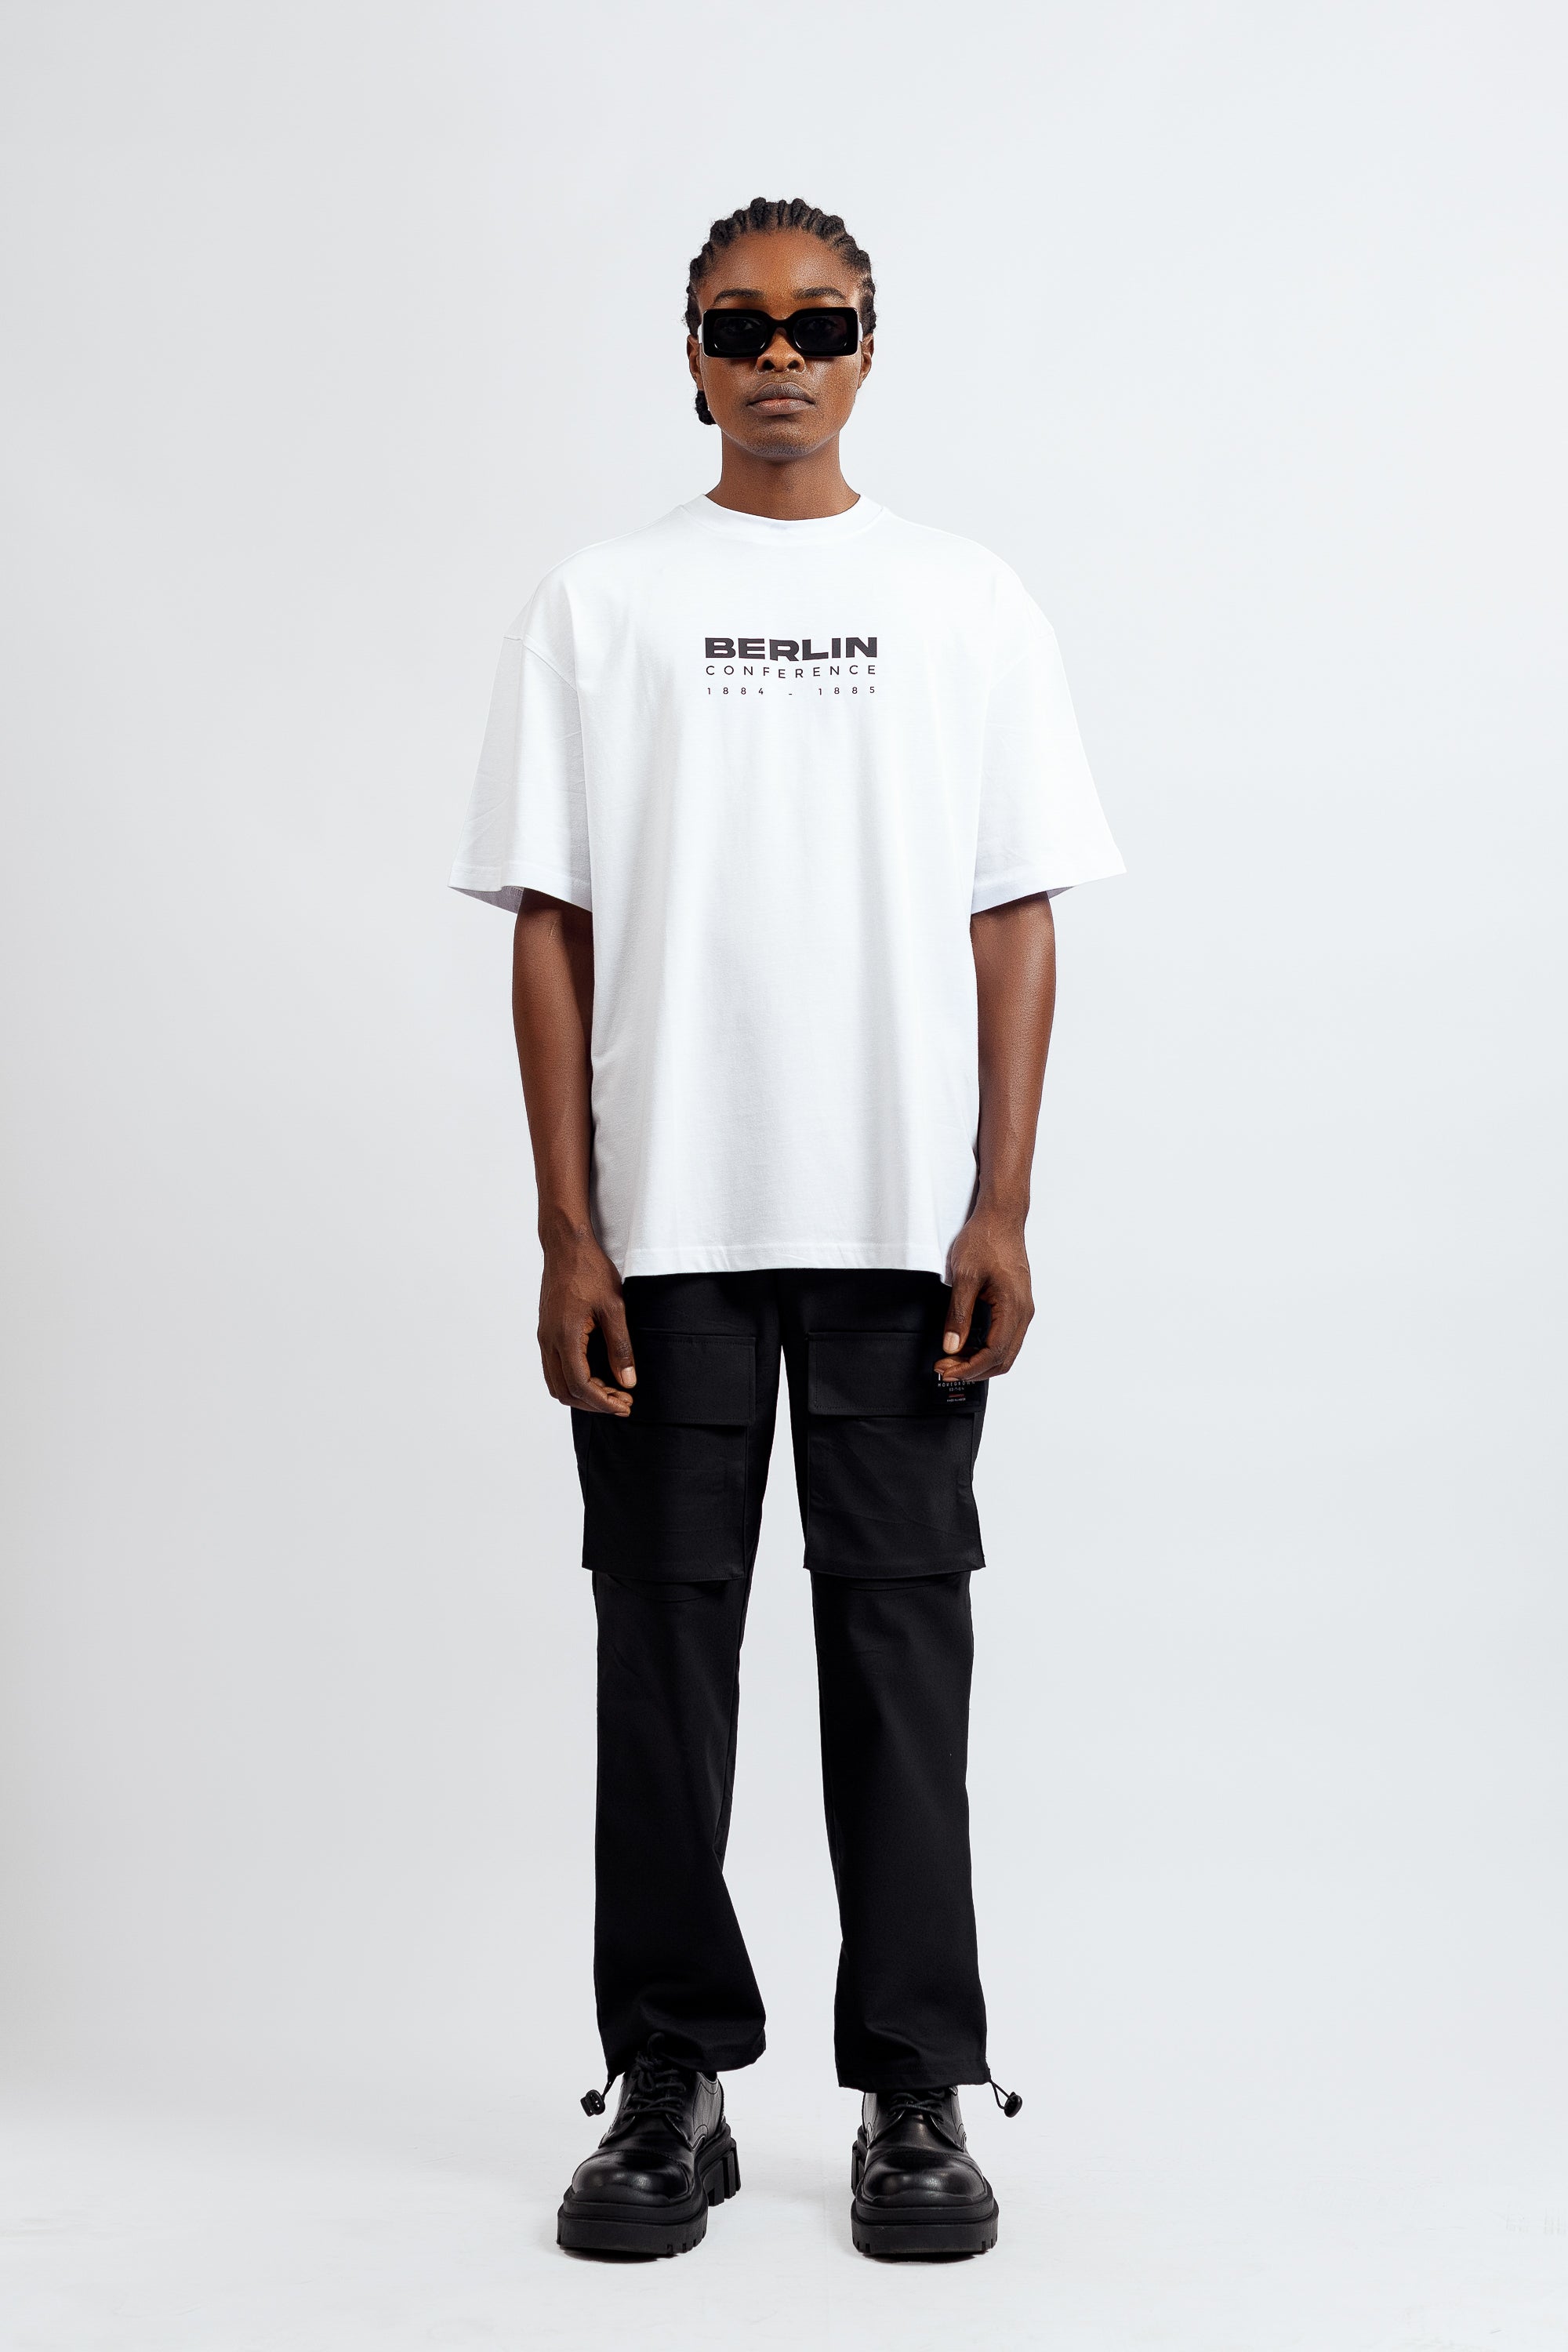 Berlin Conference Tee in White